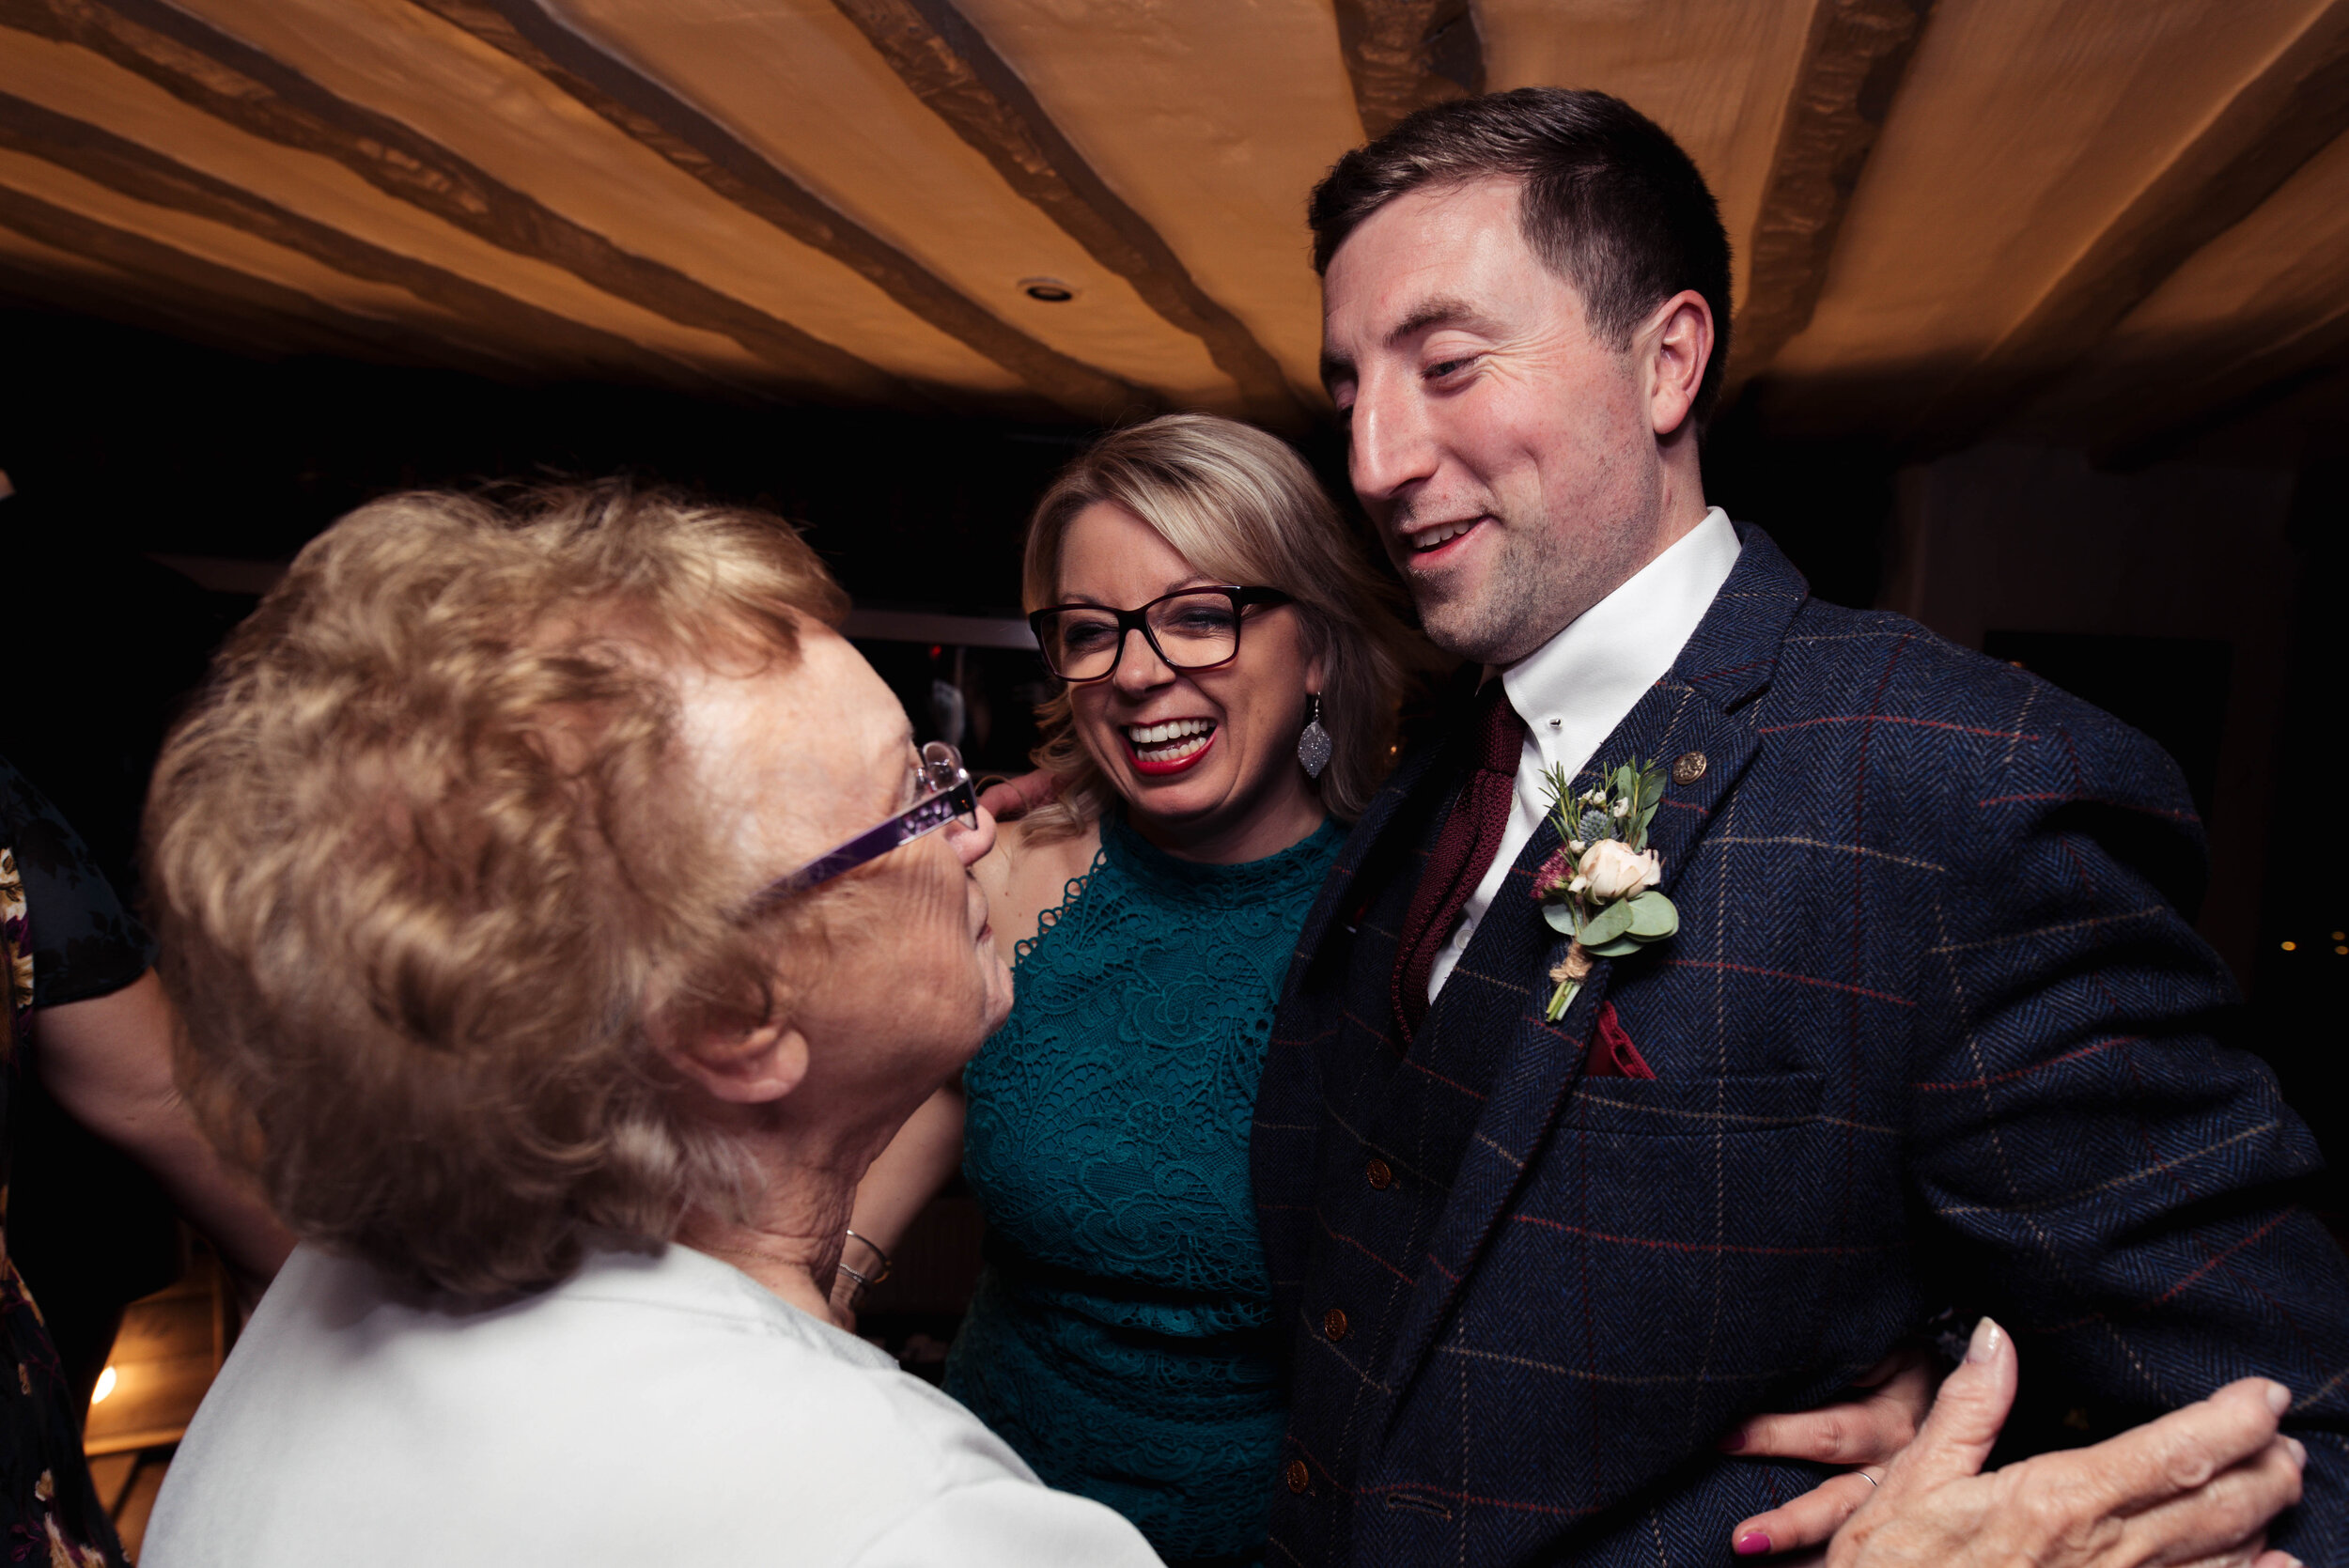 Groom goes to kiss an older relative on the dance floor